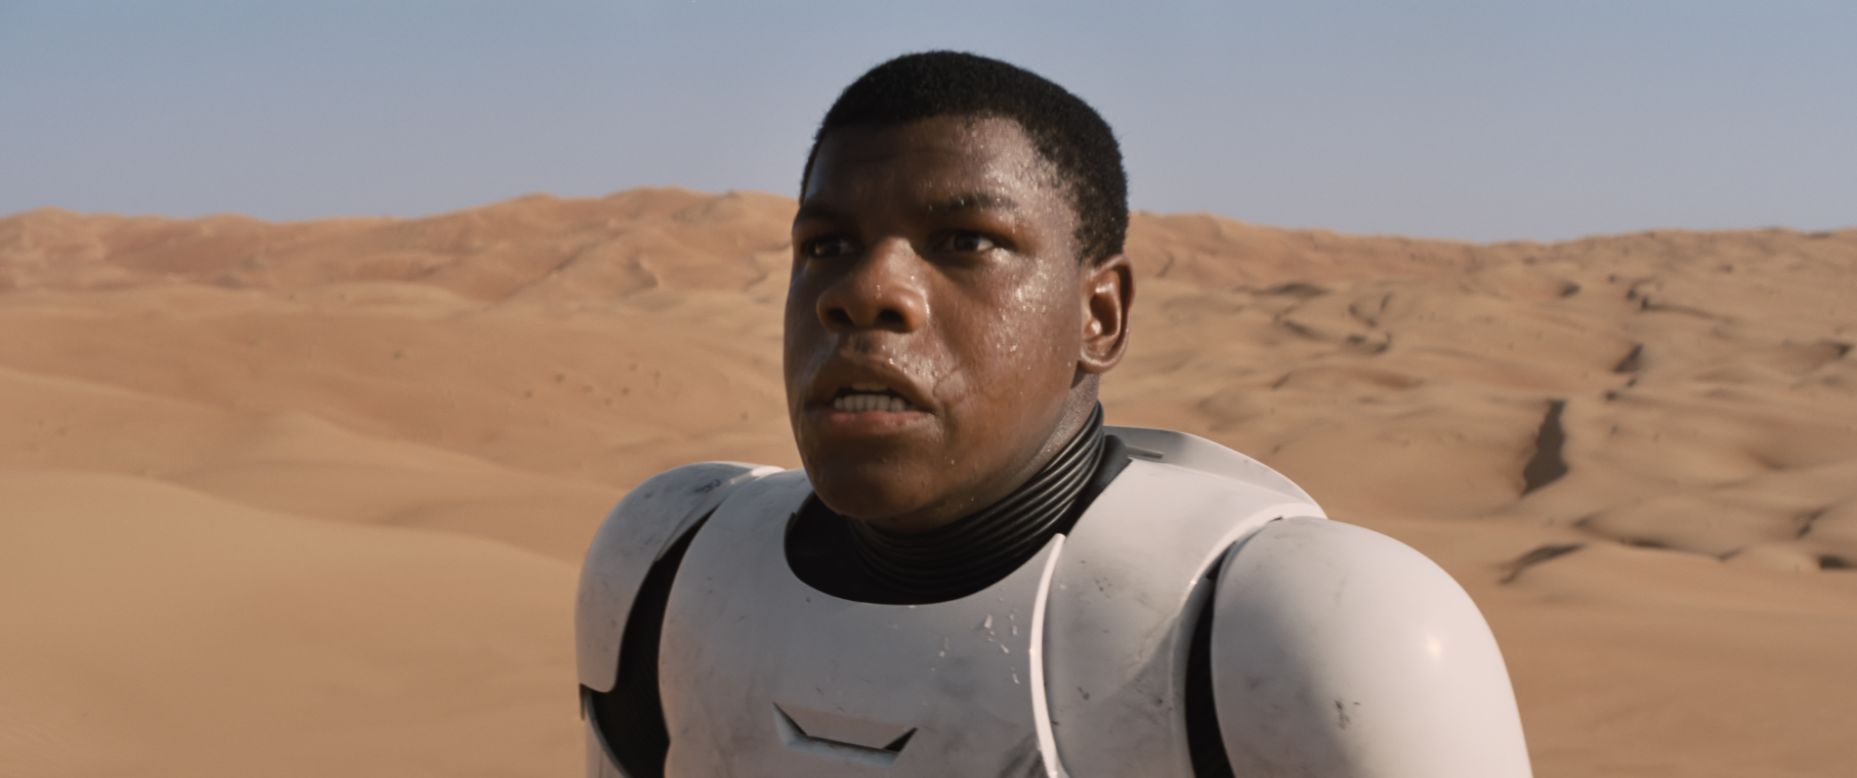 <strong>Best: </strong>"Star Wars: Episode VII" finally got a trailer just after Thanksgiving, and for that weekend it was a synonym for "best thing ever." Know what else was amazing? The way new "Star Wars" star John Boyega shut down racist remarks in the classiest way possible. Anyone flummoxed to see a black man in a Stormtrooper suit should, in the words of Boyega, "get used to it." 